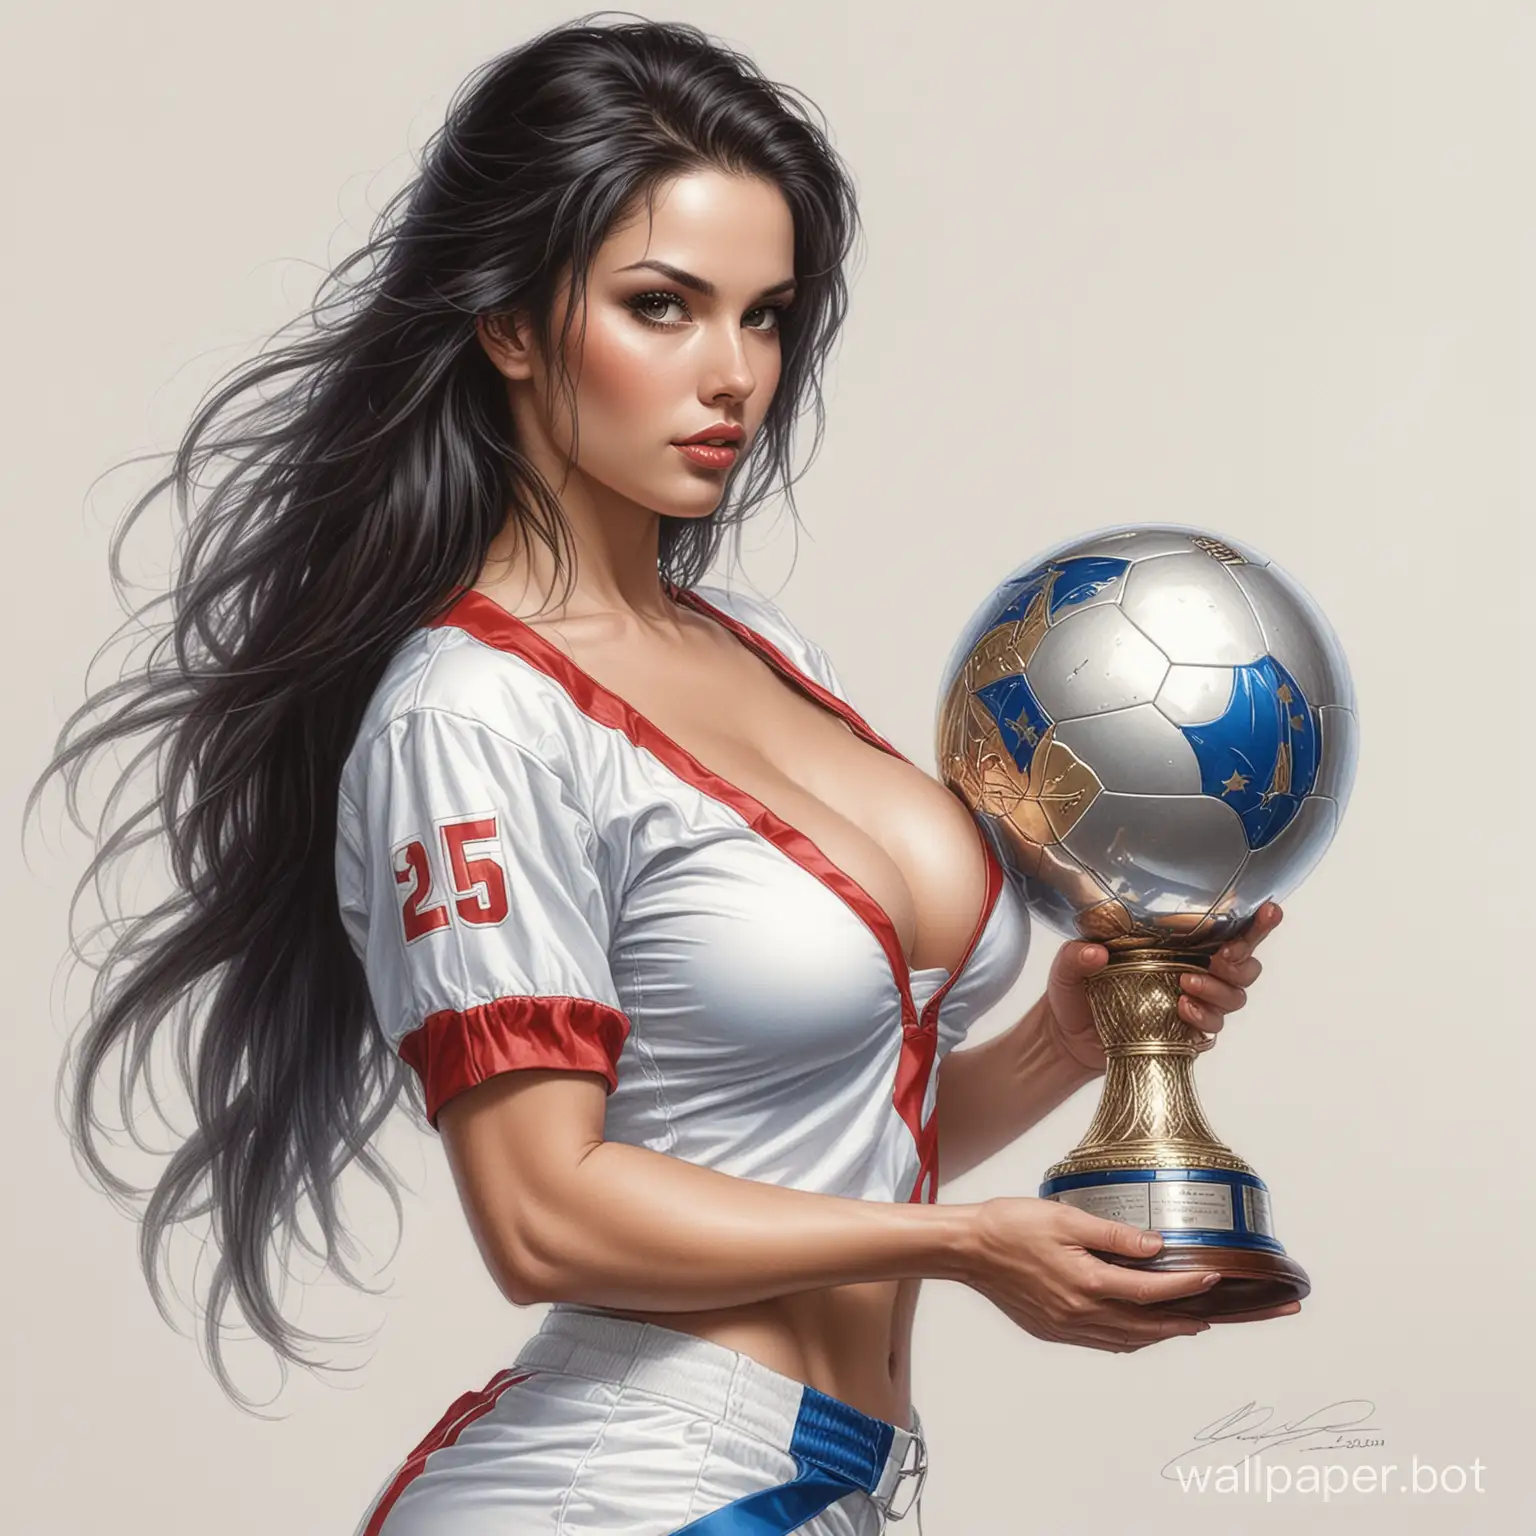 Sketch Lisa Duarte 25 years old dark hair with styling 7th size breasts narrow waist in white-red-blue football uniform with deep neckline holding a large Champions Cup on white background highly realistic drawing in colored pencil style Luis Royo